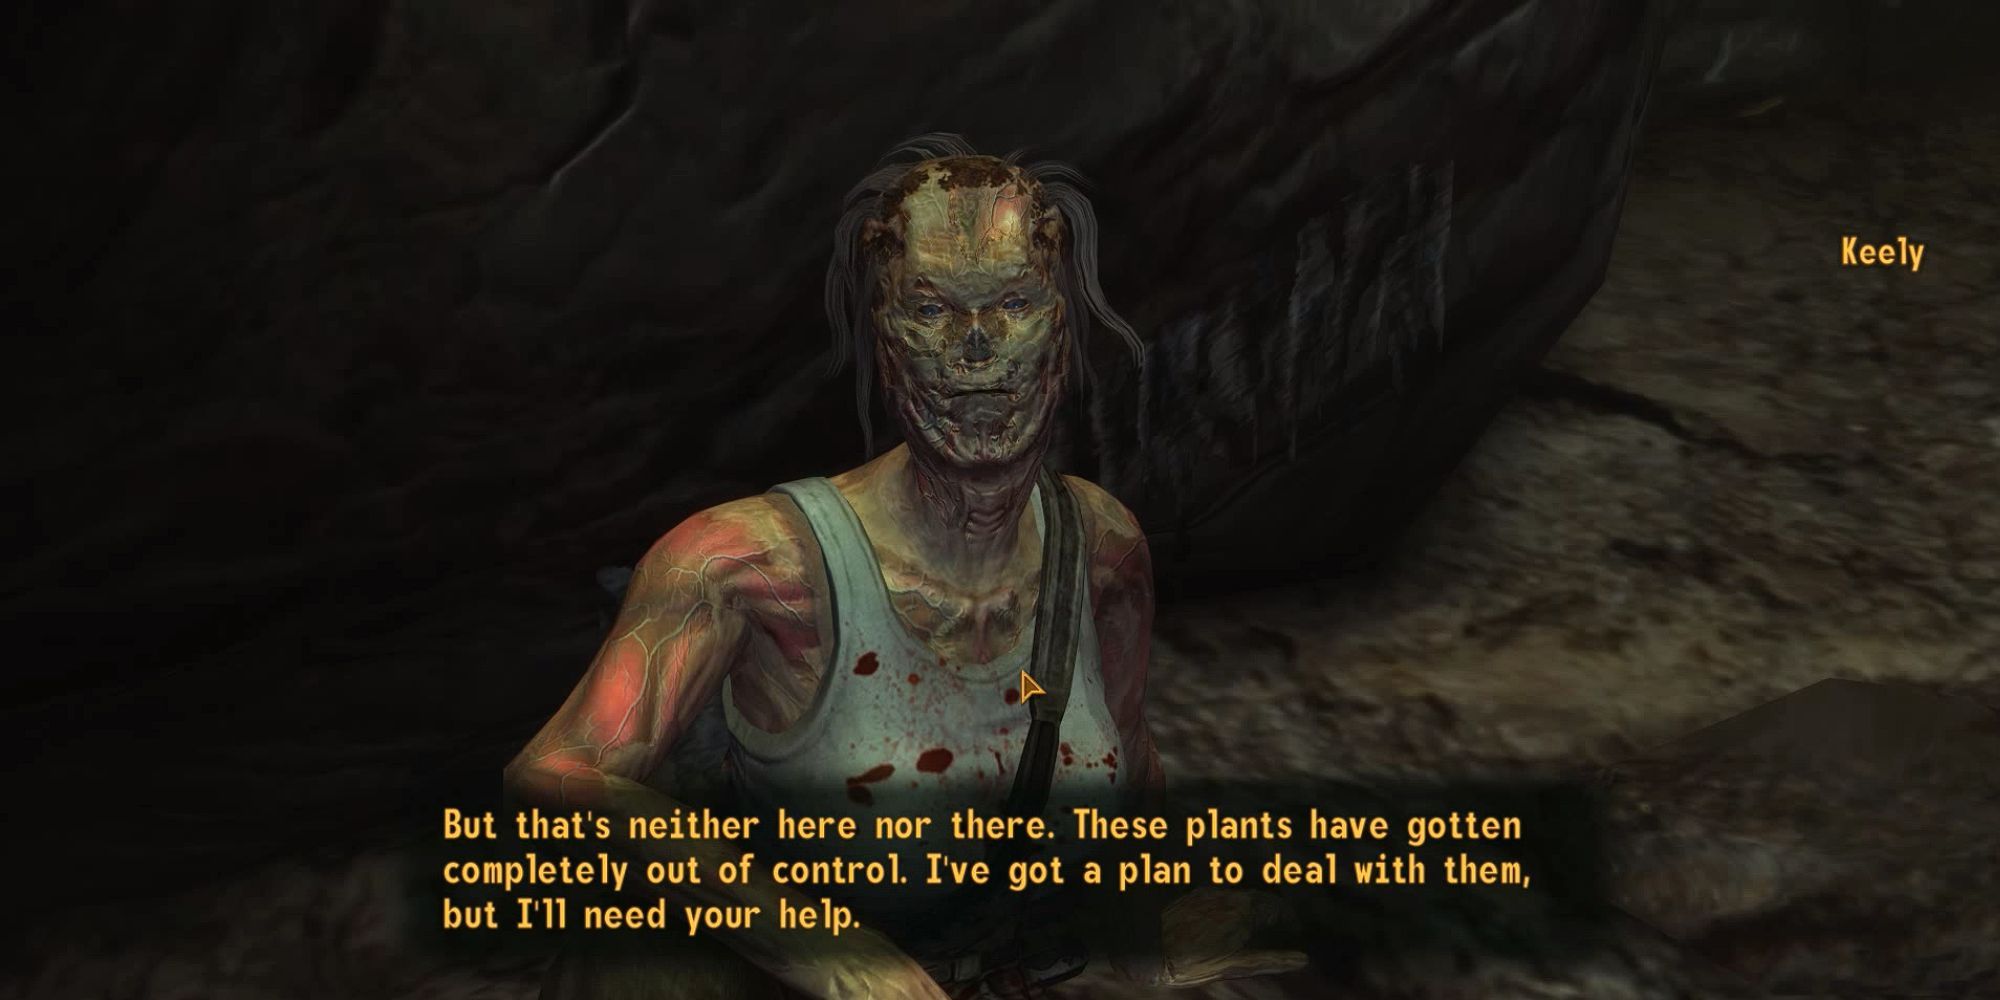 Keely asks the player for help with the mutated plants as she sits in the cavern tunnels